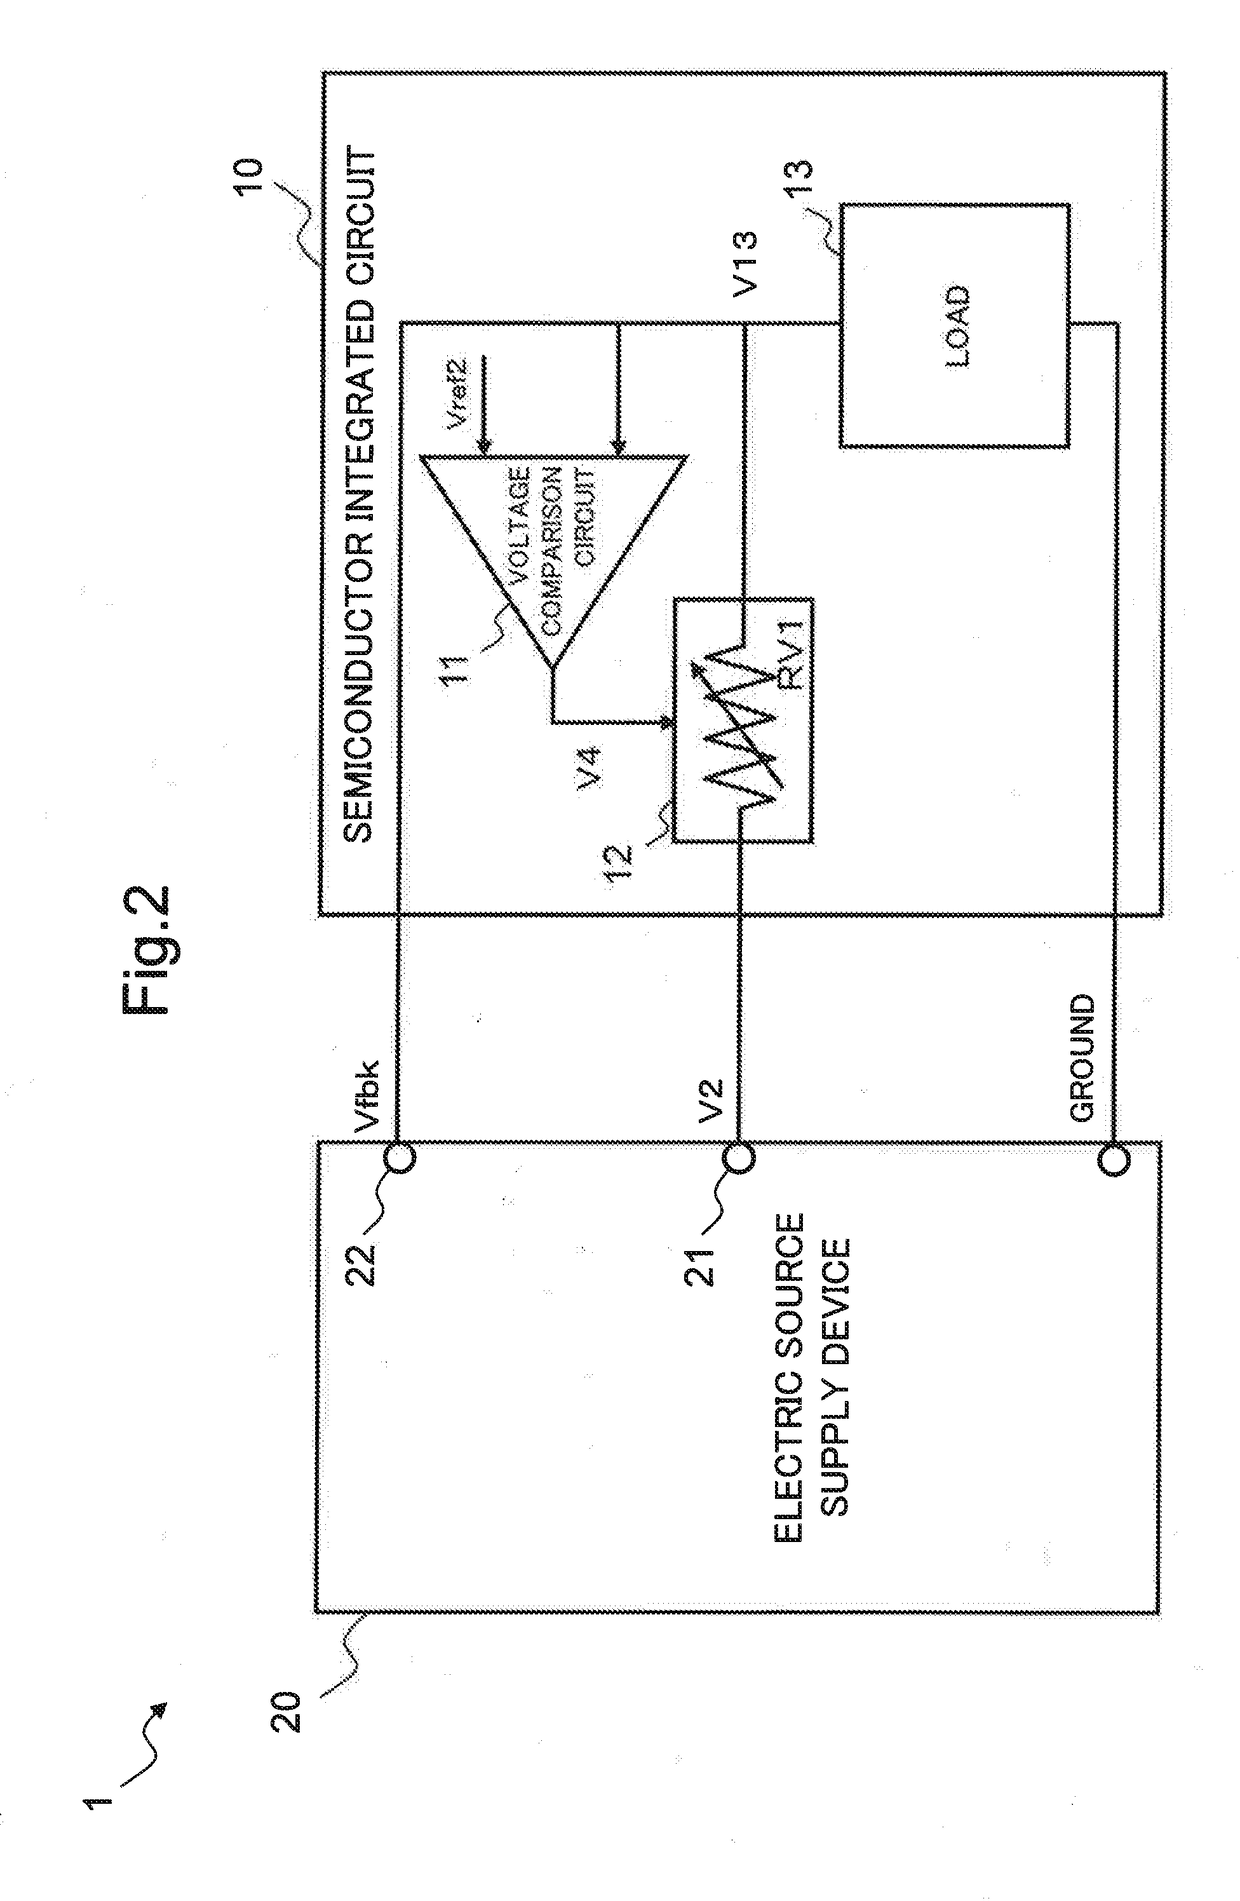 Semiconductor integrated circuit, semiconductor system, and electric source voltage control method